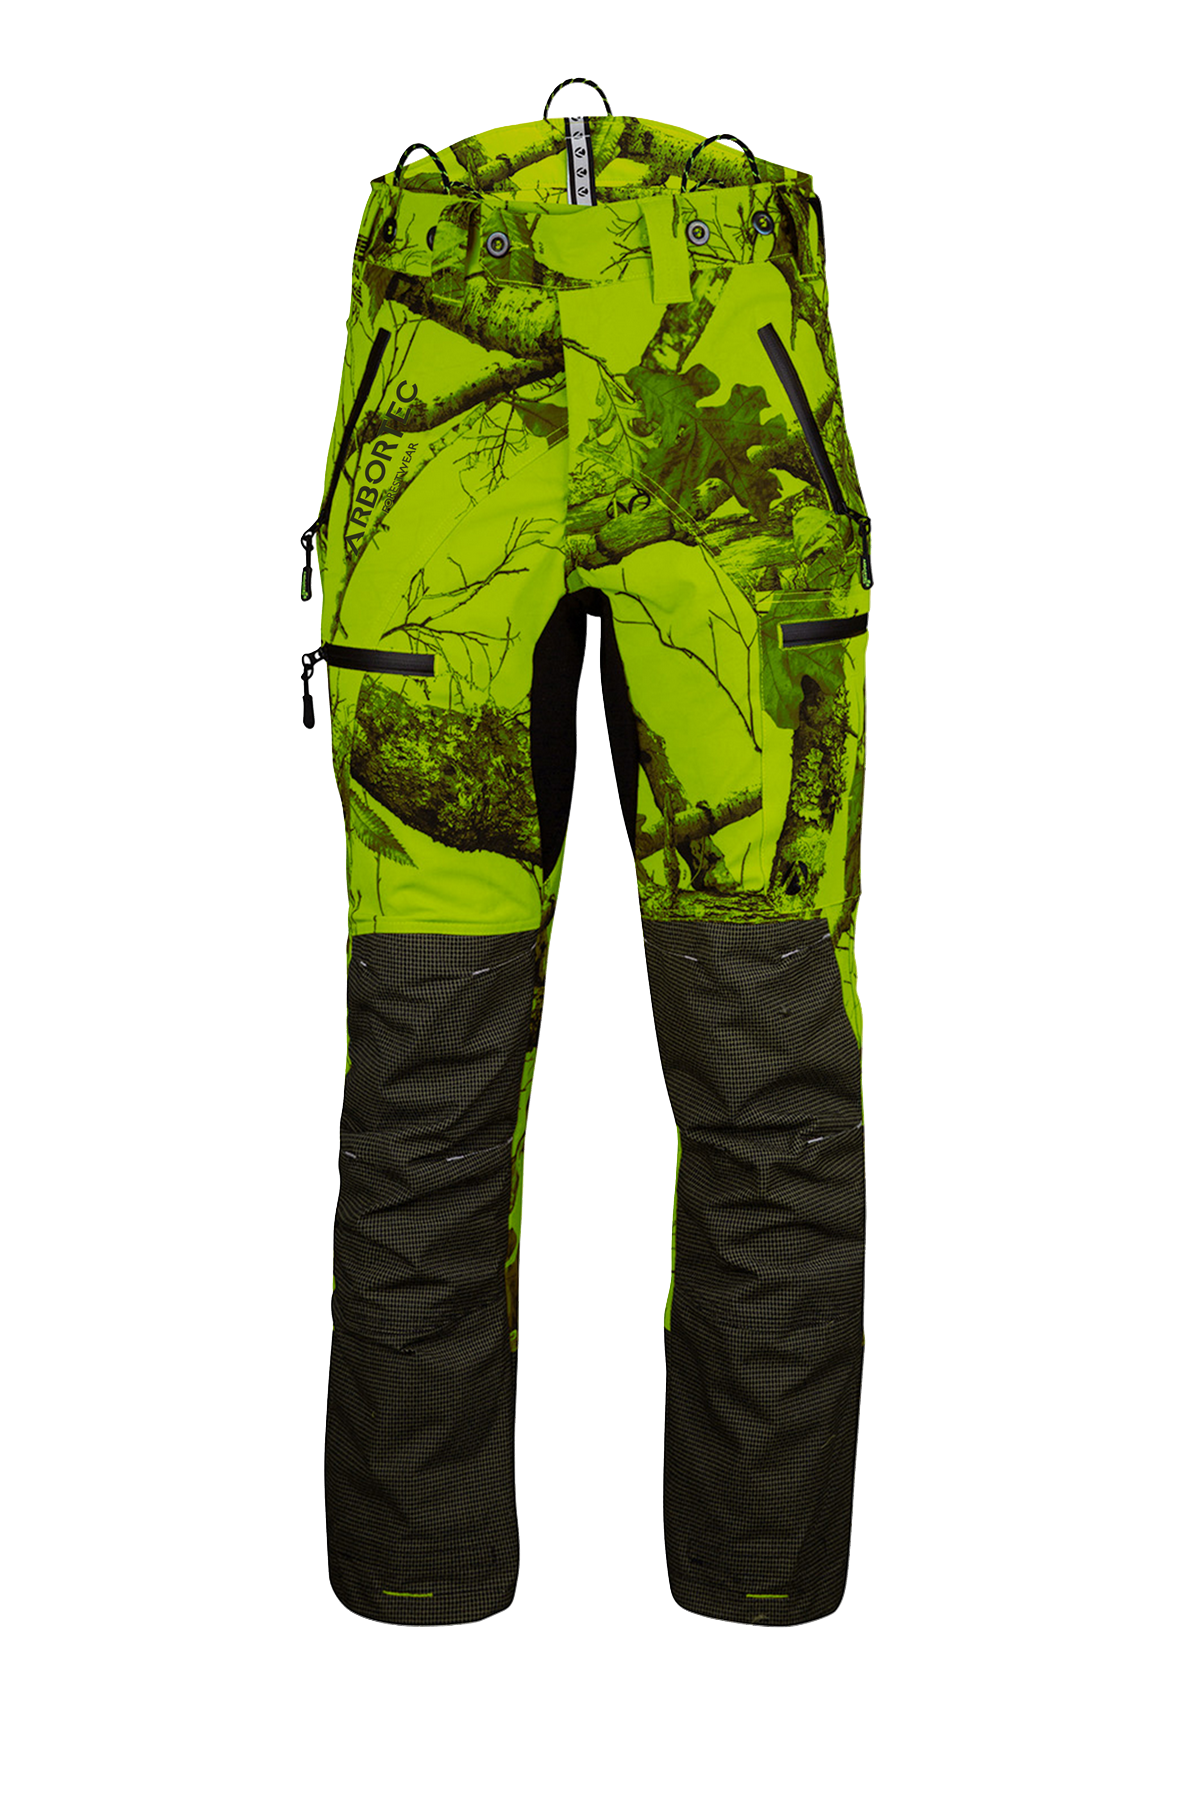 AT4060 UL - Breatheflex Pro Realtree Chainsaw Trousers Design A/Class 1 - Lime